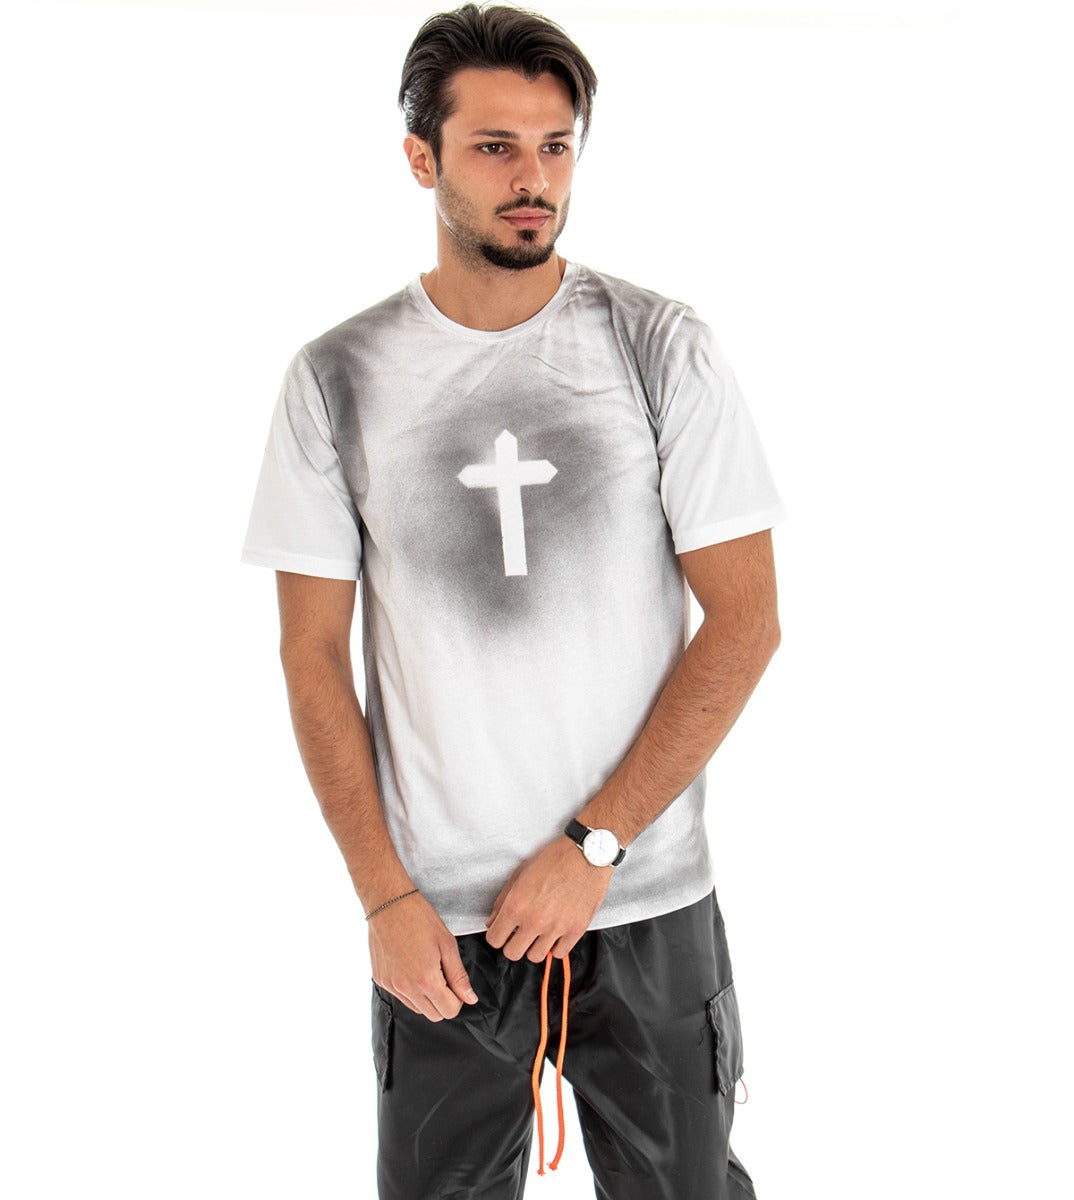 Men's T-shirt Short Sleeves Cotton Round Neck Casual Cross White GIOSAL